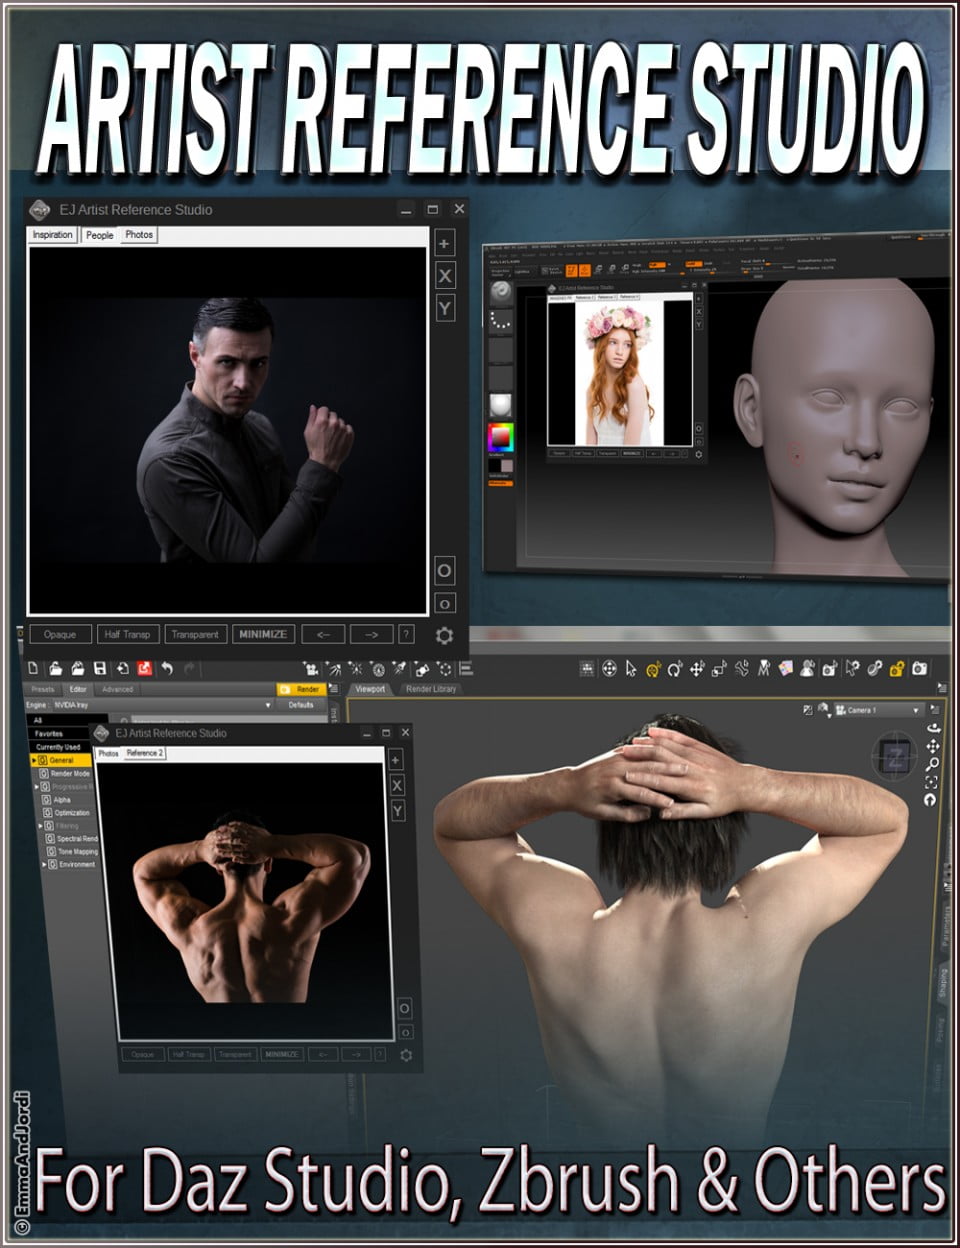 EJ Artist Reference Studio for Daz Studio Zbrush and Others